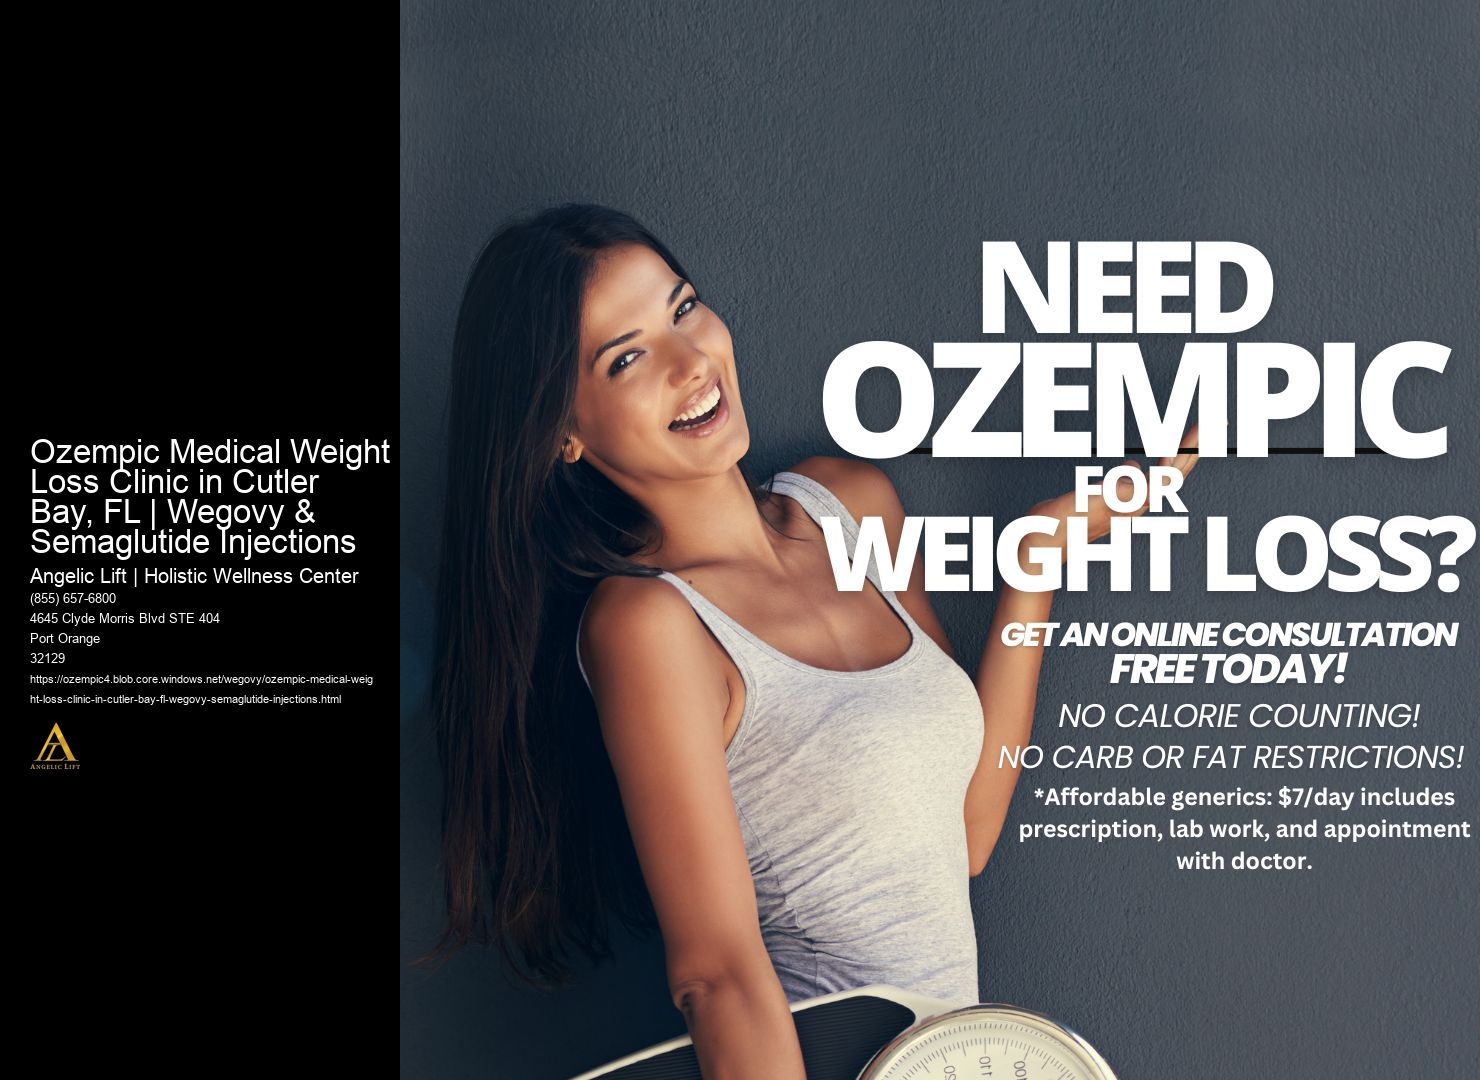 Ozempic Medical Weight Loss Clinic in Cutler Bay, FL | Wegovy & Semaglutide Injections